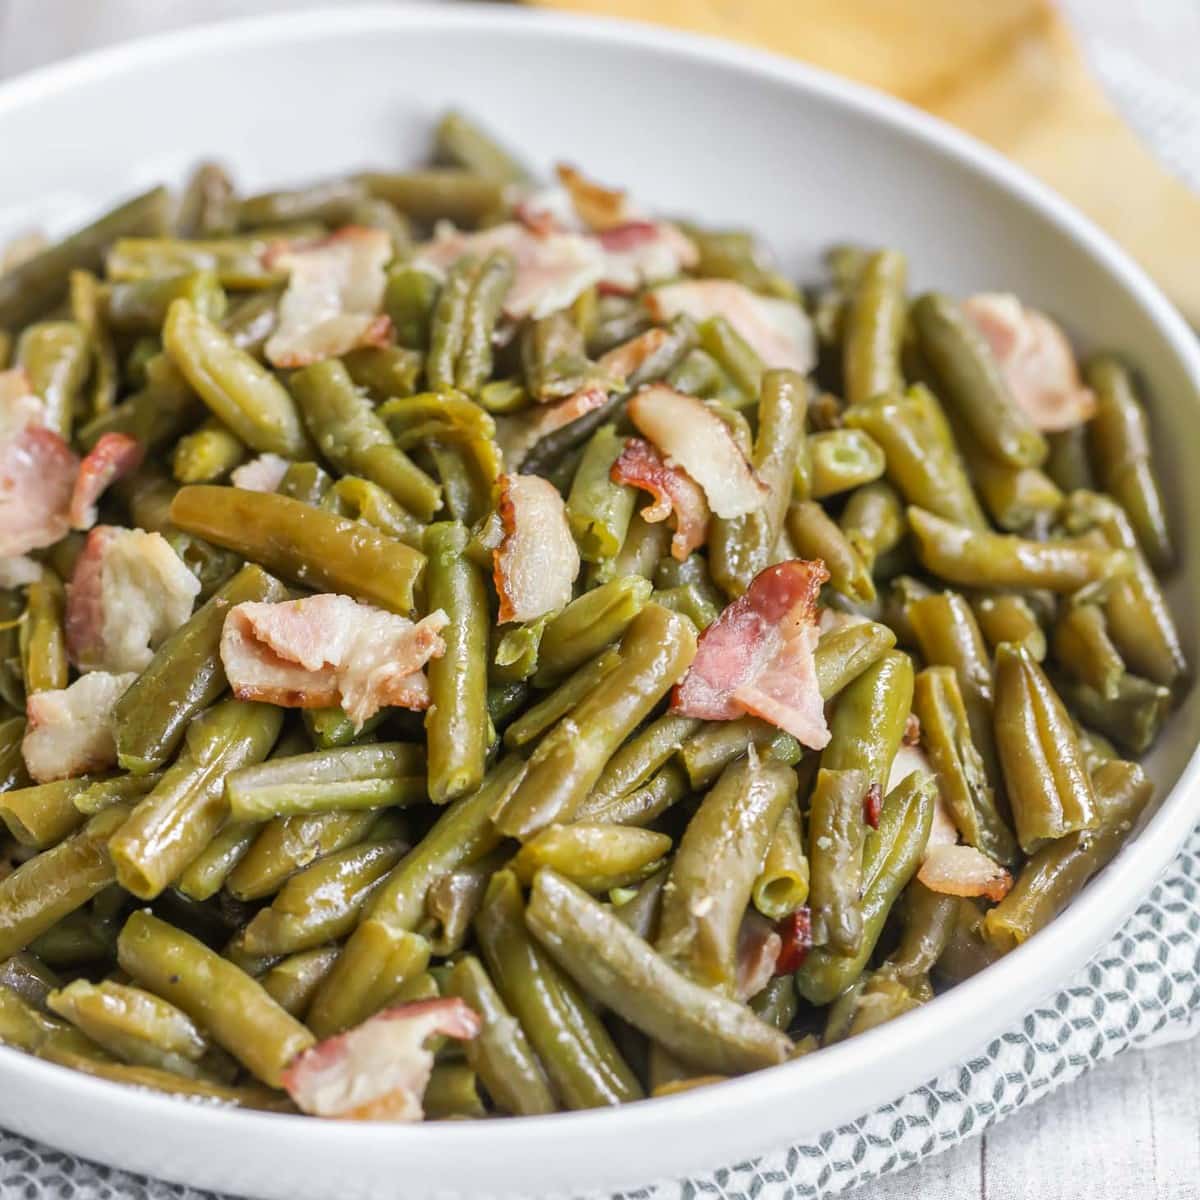 Thanksgiving side dishes - a bowl filled with crockpot green beans with bacon.